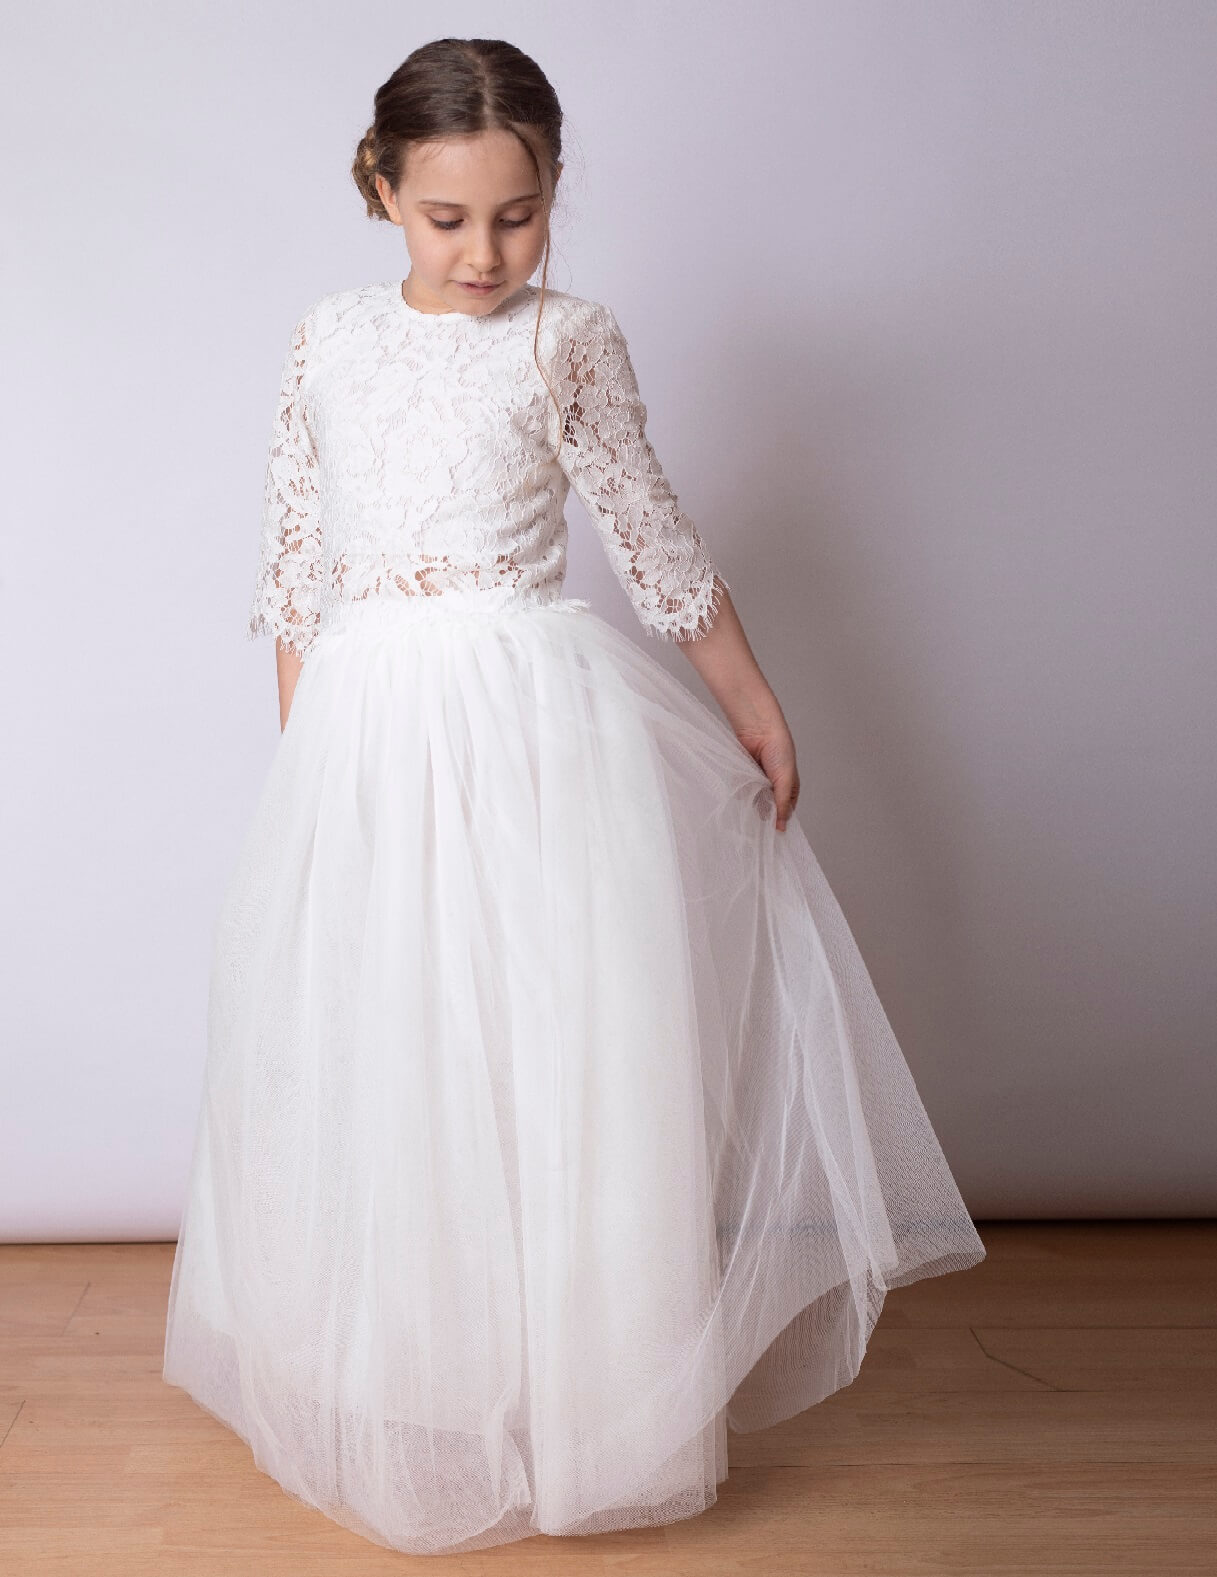 White Lace top and skirt worn by model